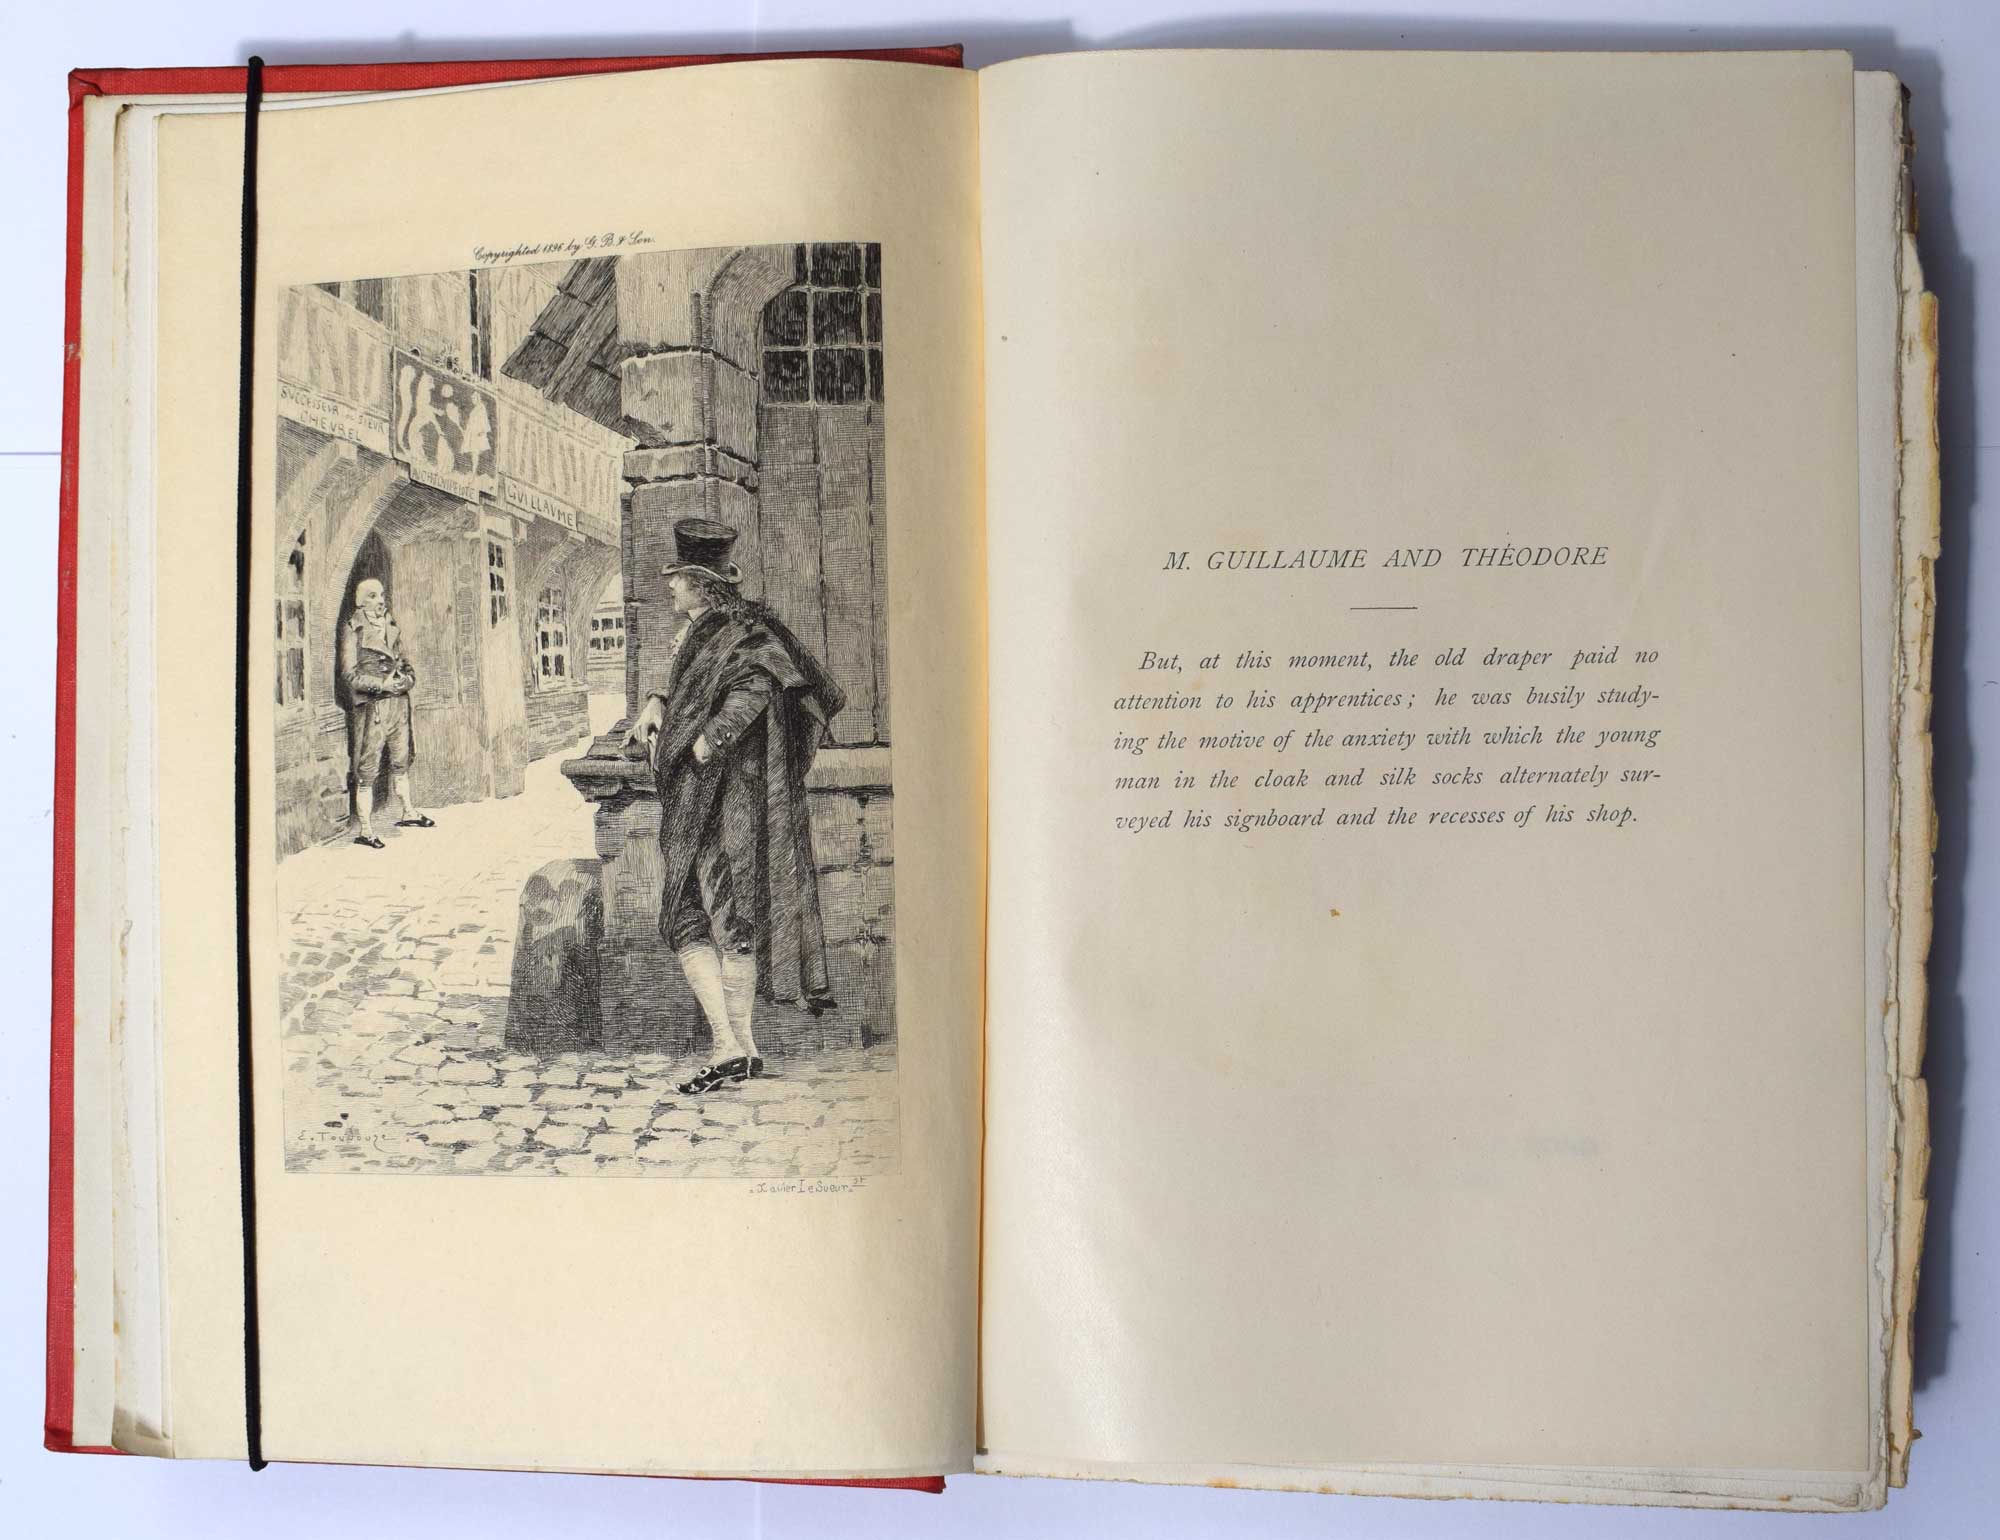 La Comedie Humaine. Scenes of Parisian Life. Scenes of Private Life. Etchings by Gery-Bichard, Eugene Gaujean and R de Los Rios, after paintings by Georges Cain and Louis-Edouard Fournier (amongst others). 22 volume set. [The Human Comedy]